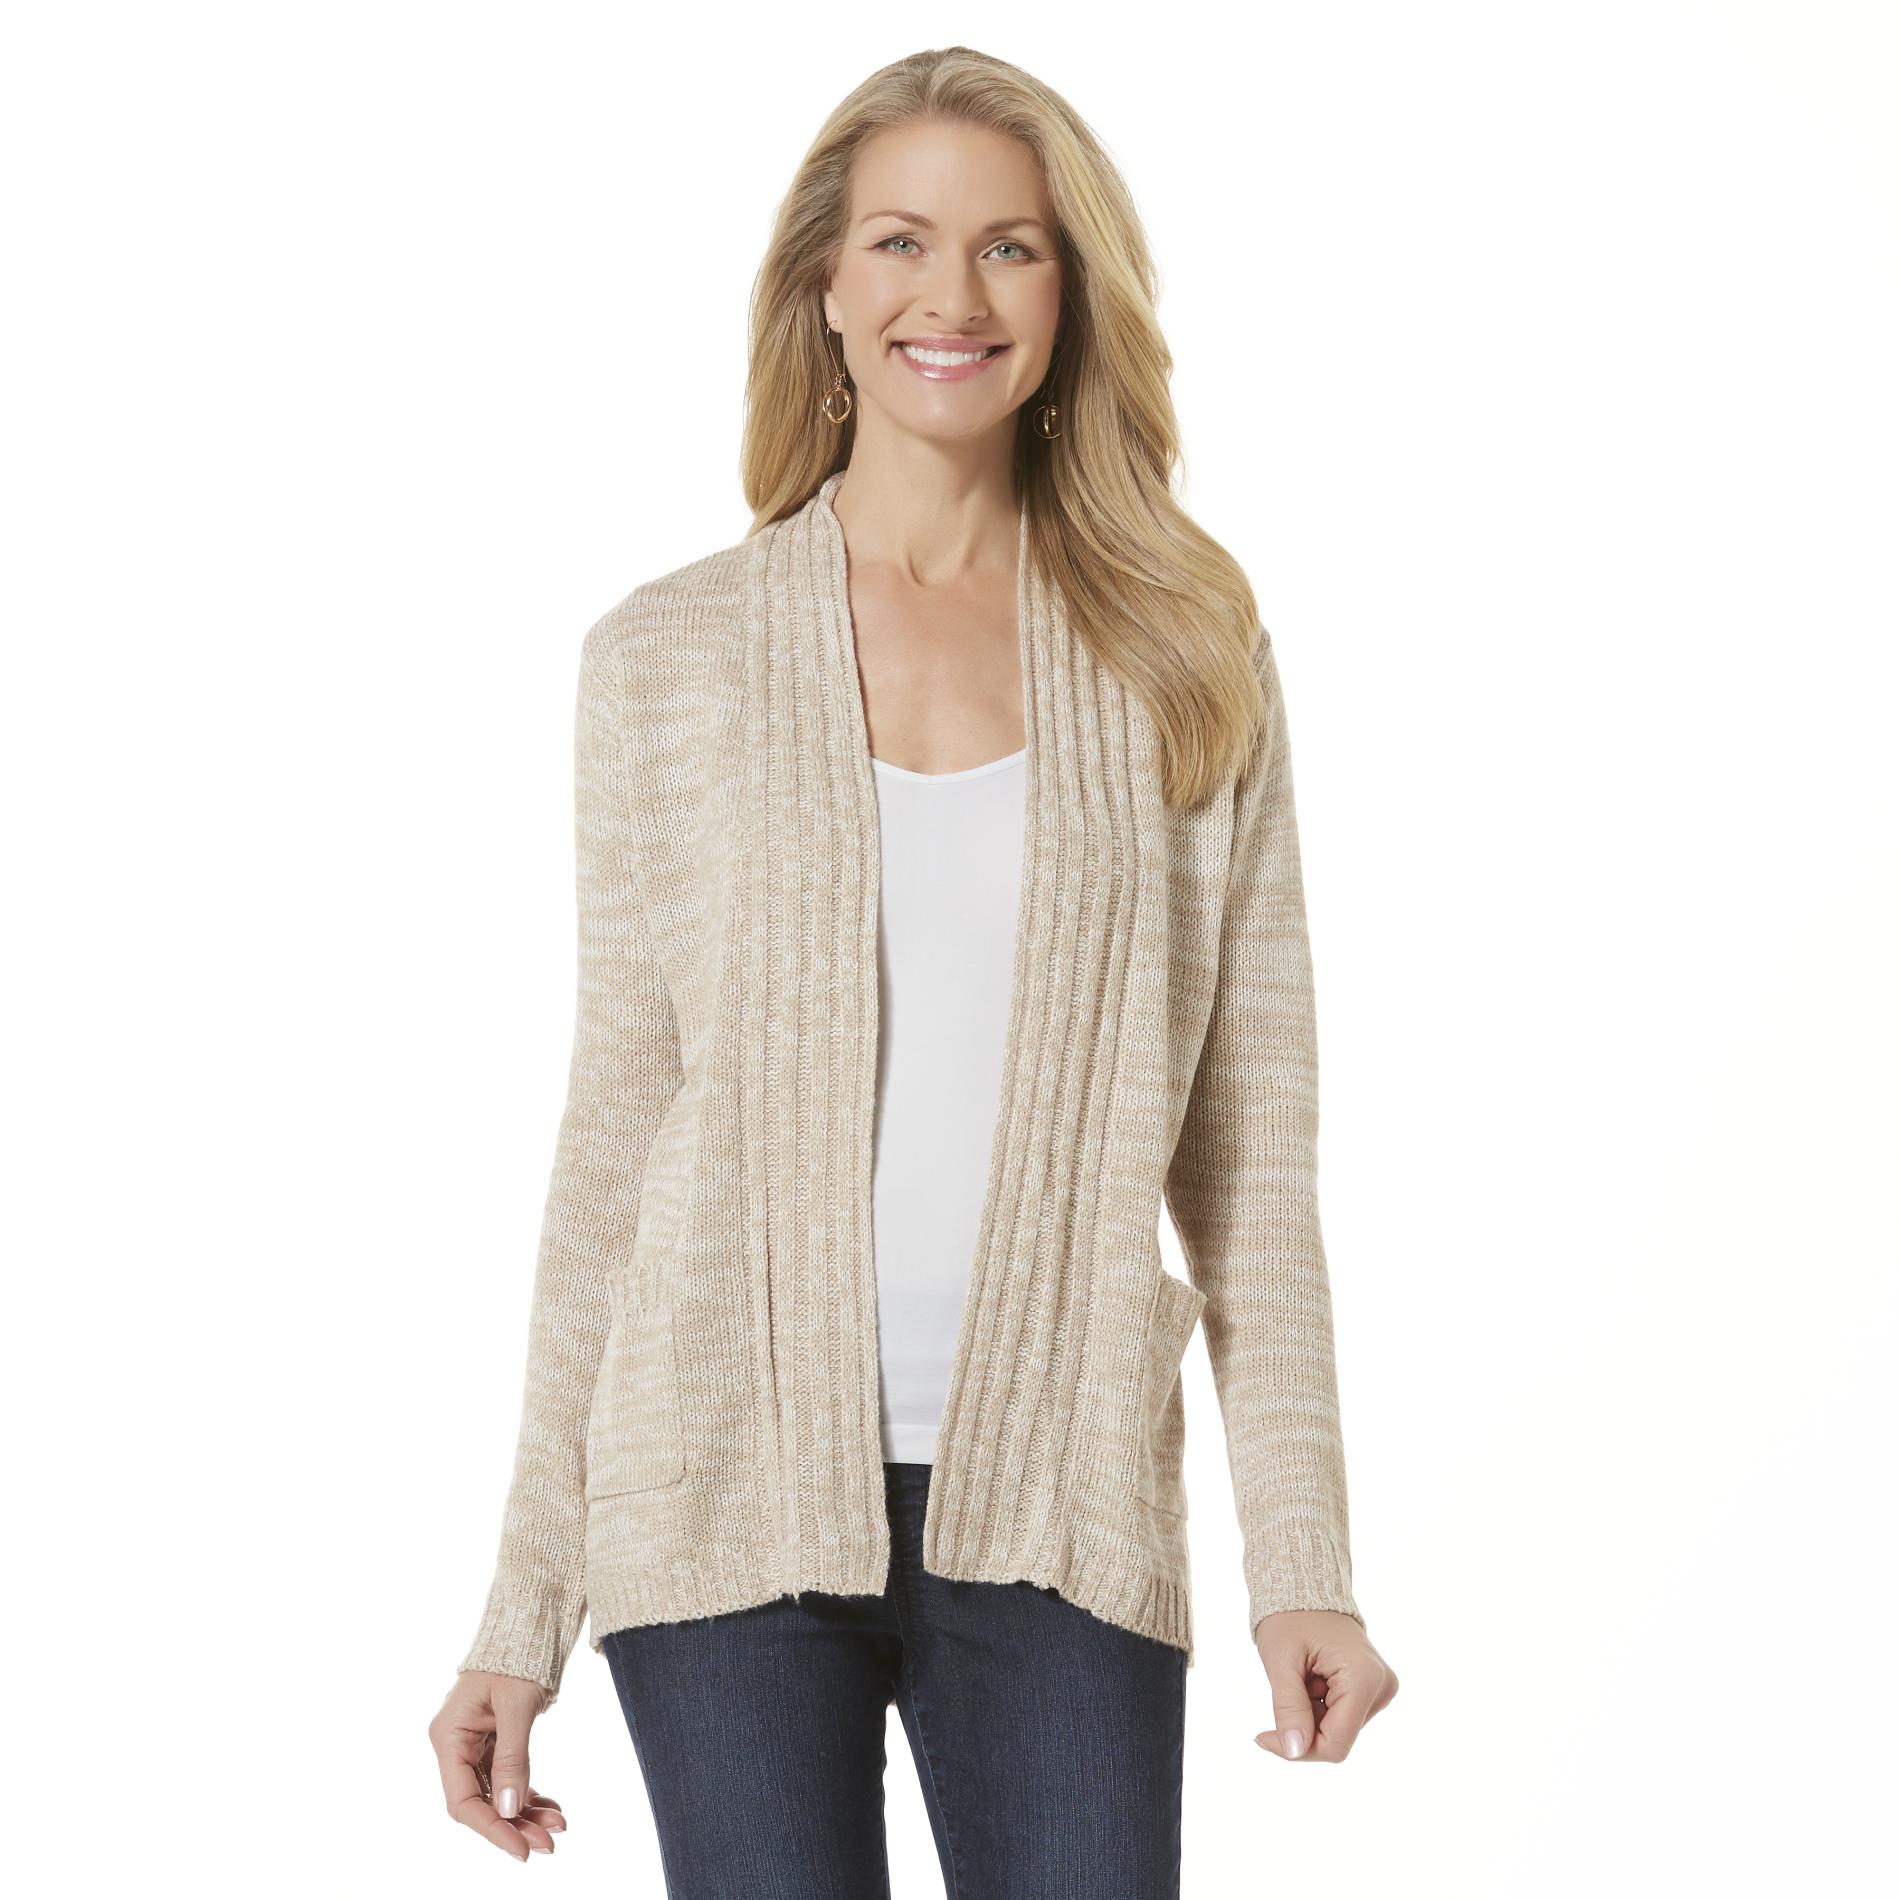 Basic Editions Women's Open Front Sweater